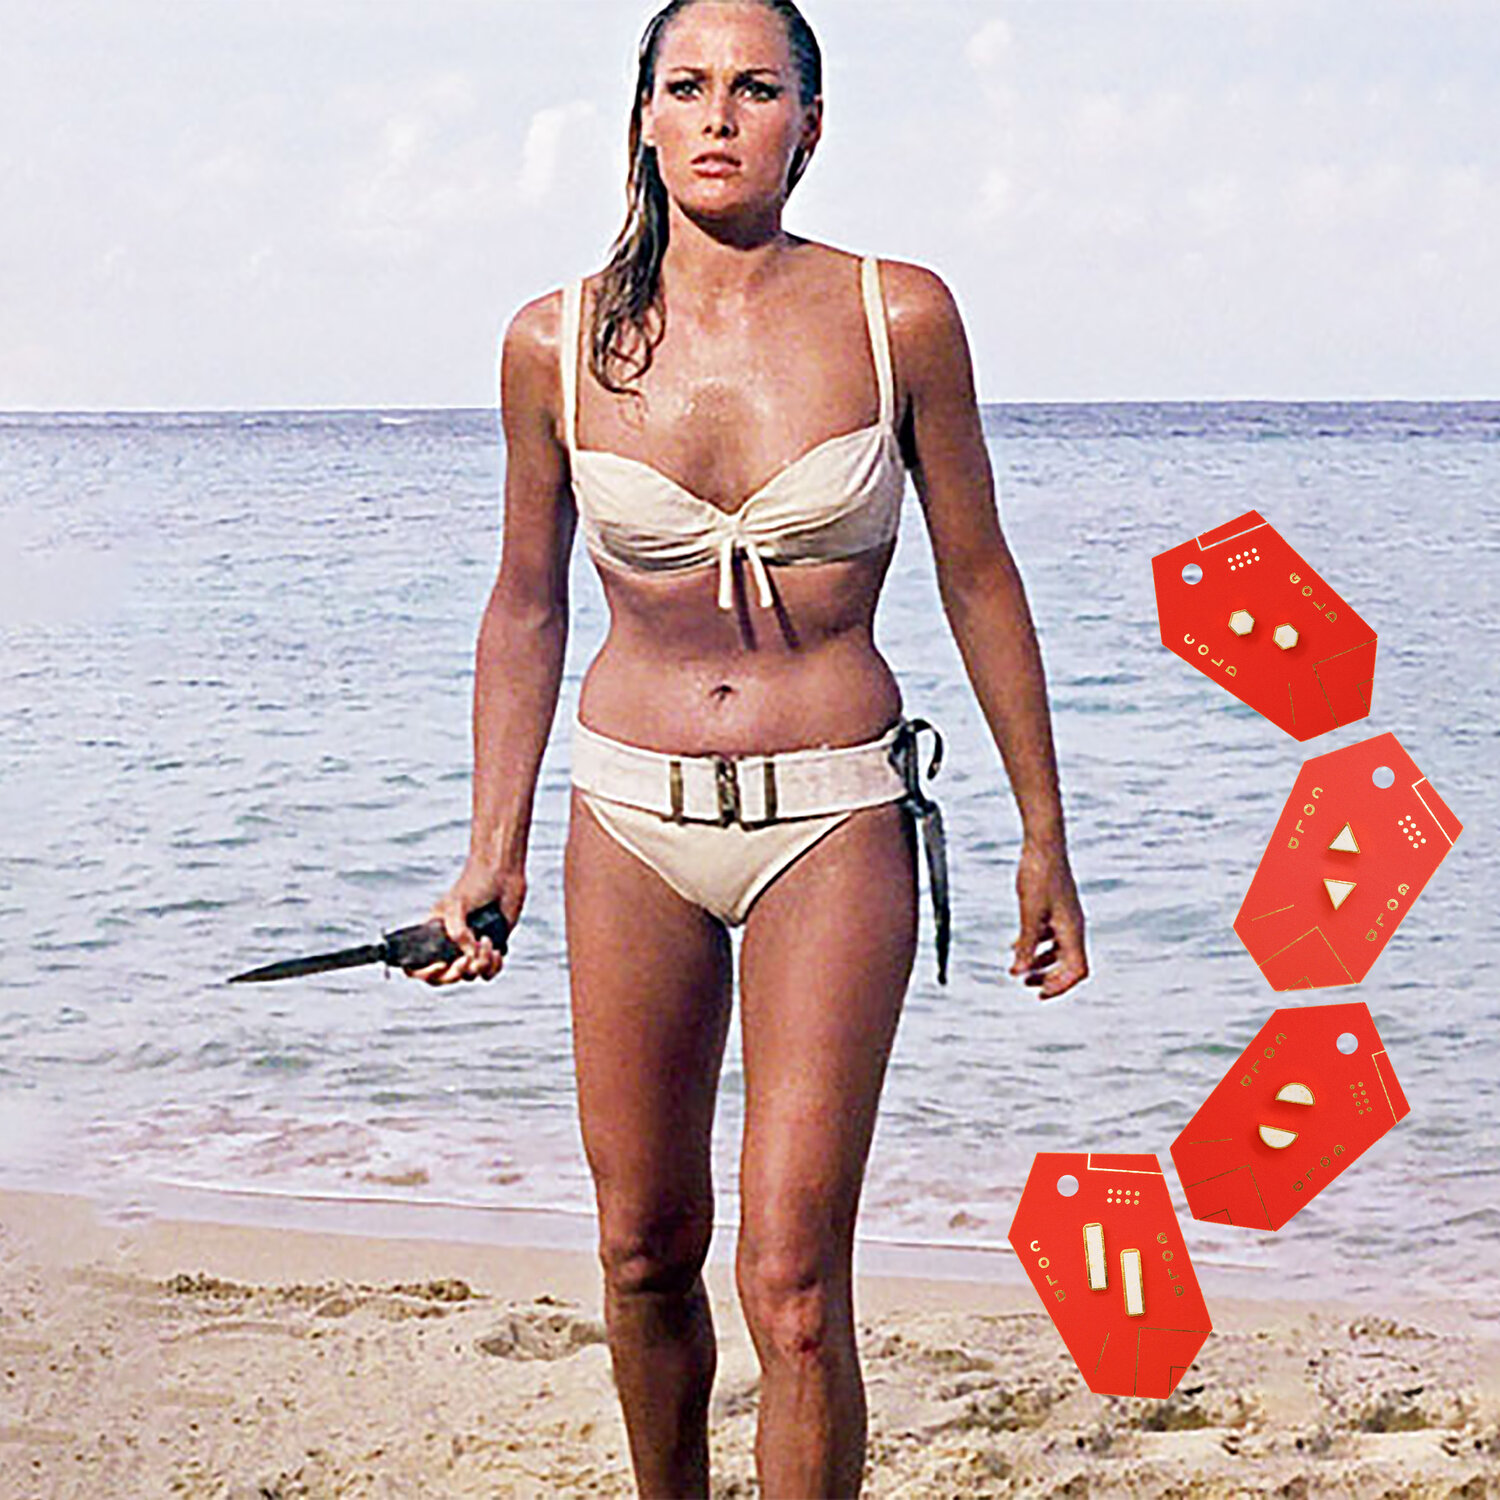 Ursula Andress slaying the beach look like we’ve never seen + The white and gold speckled geo studs from Cold Gold.